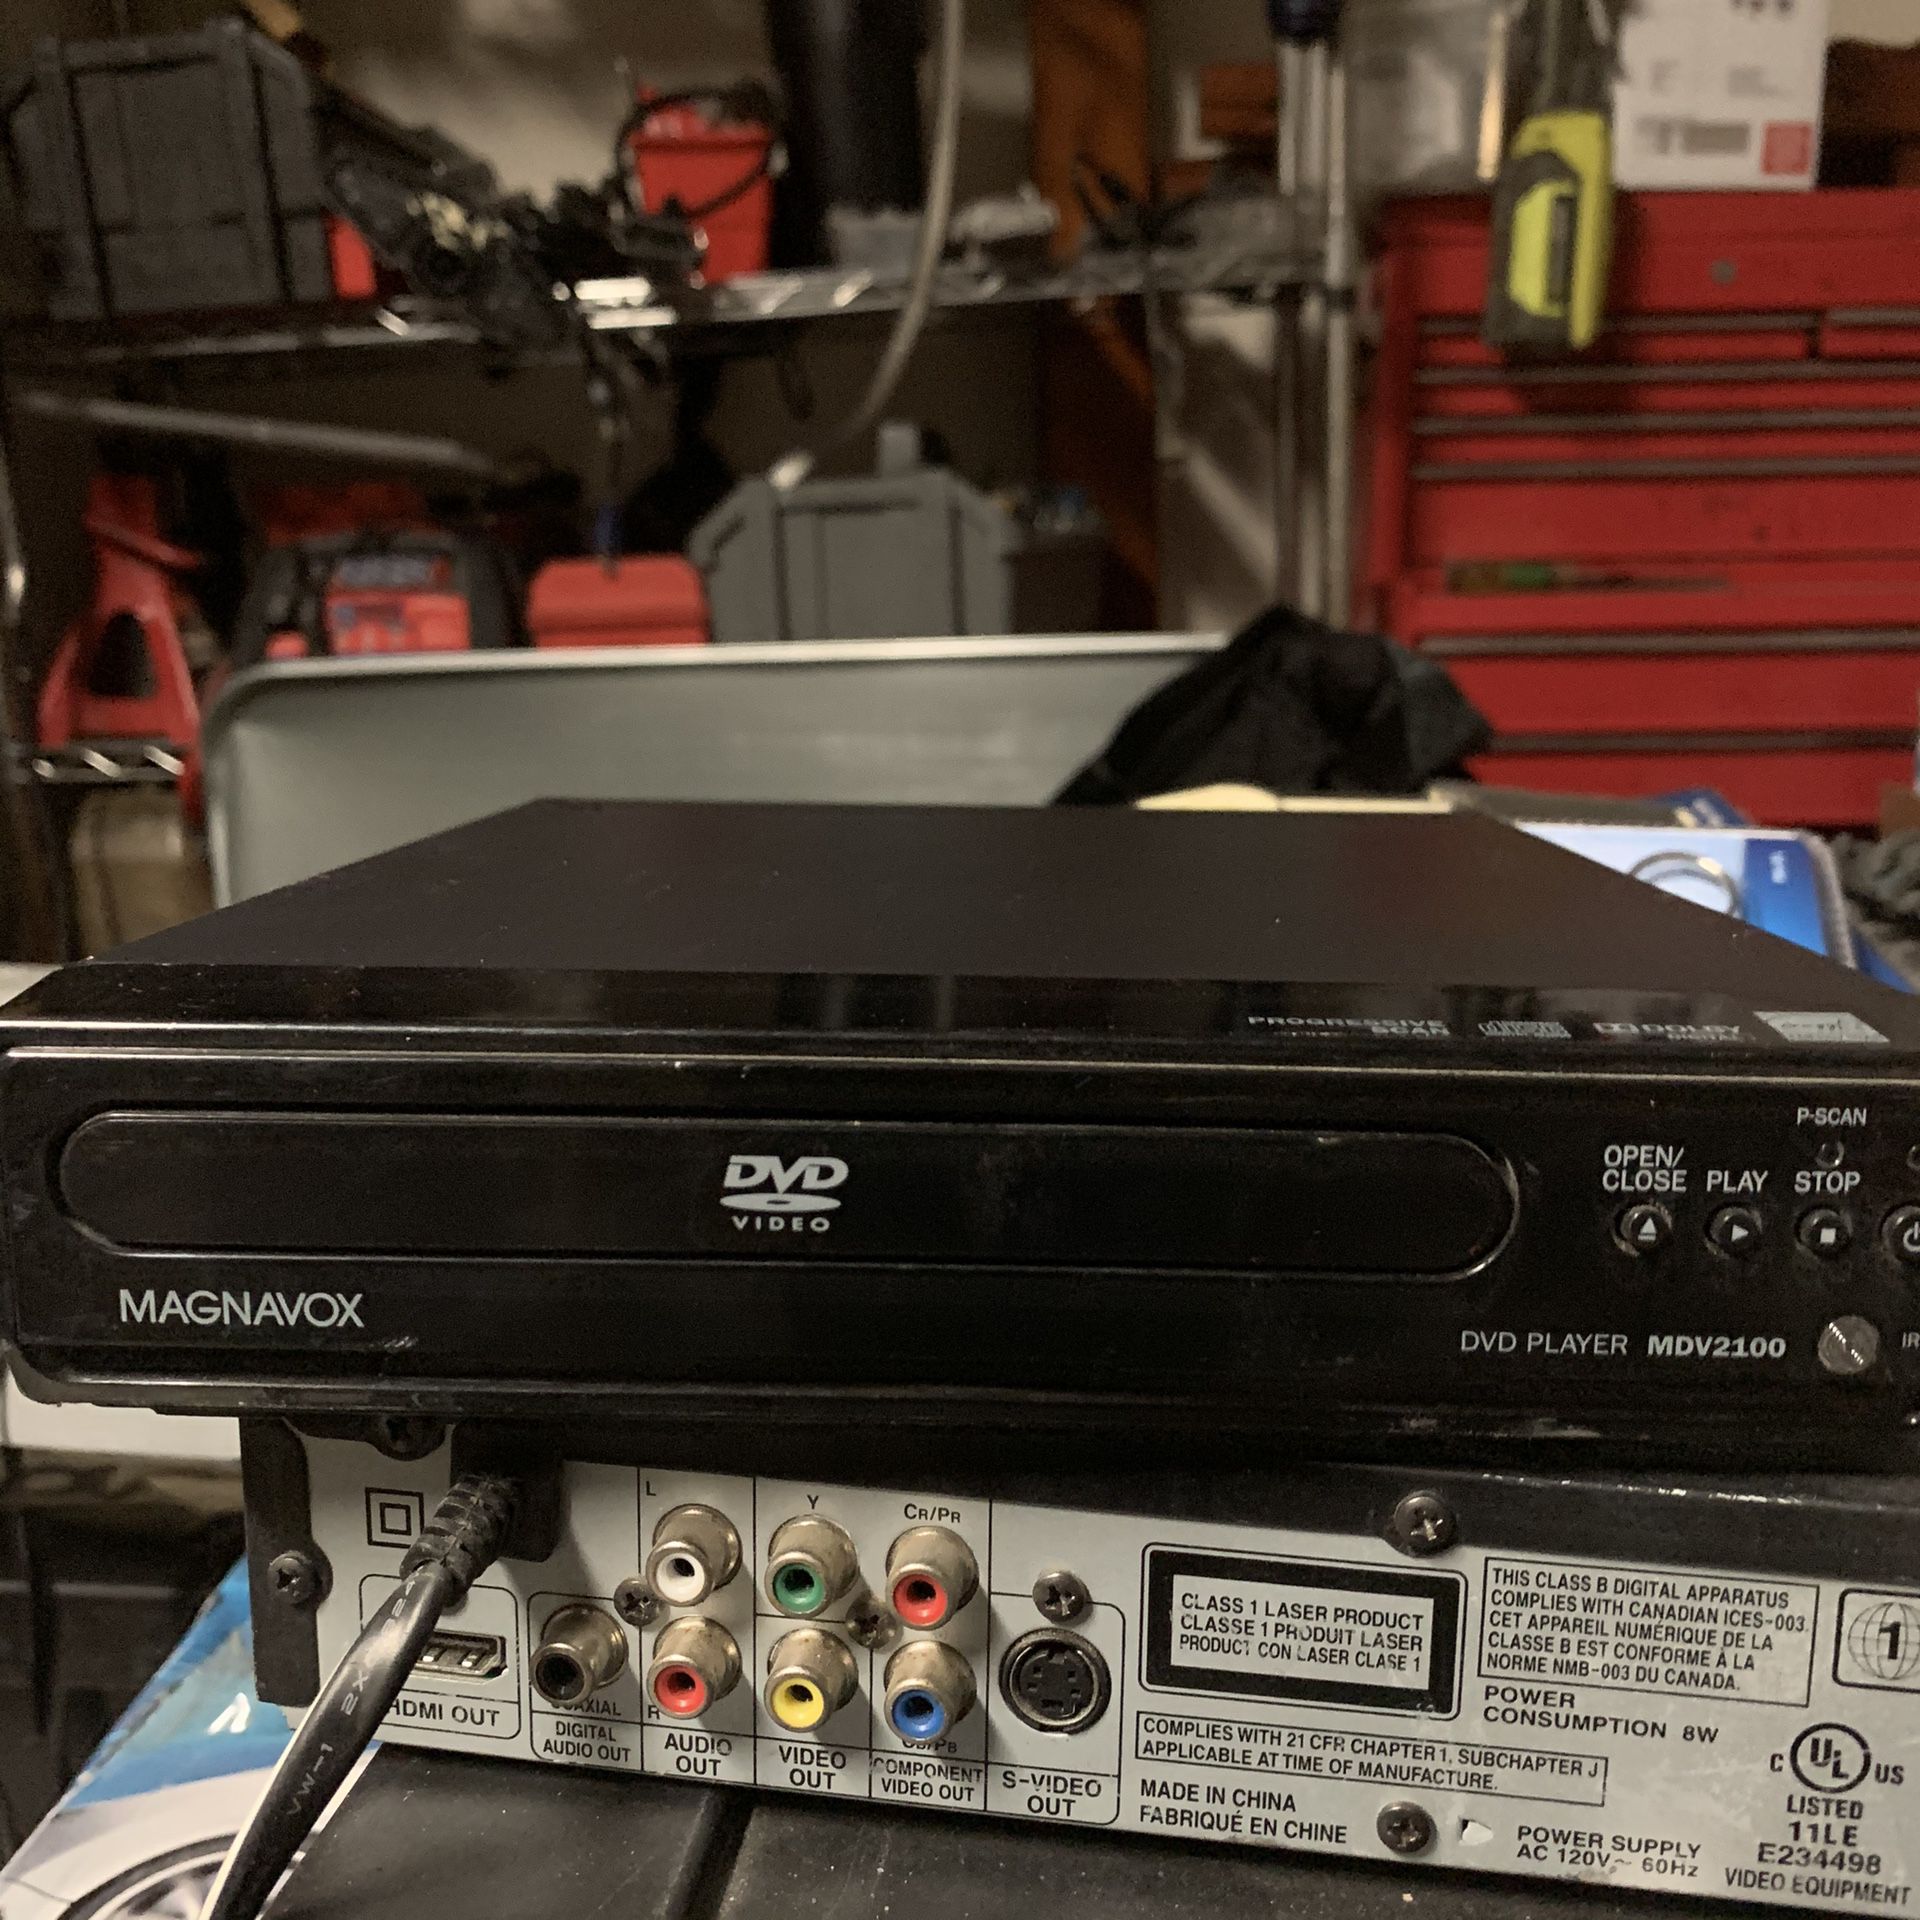 2 different DVD players